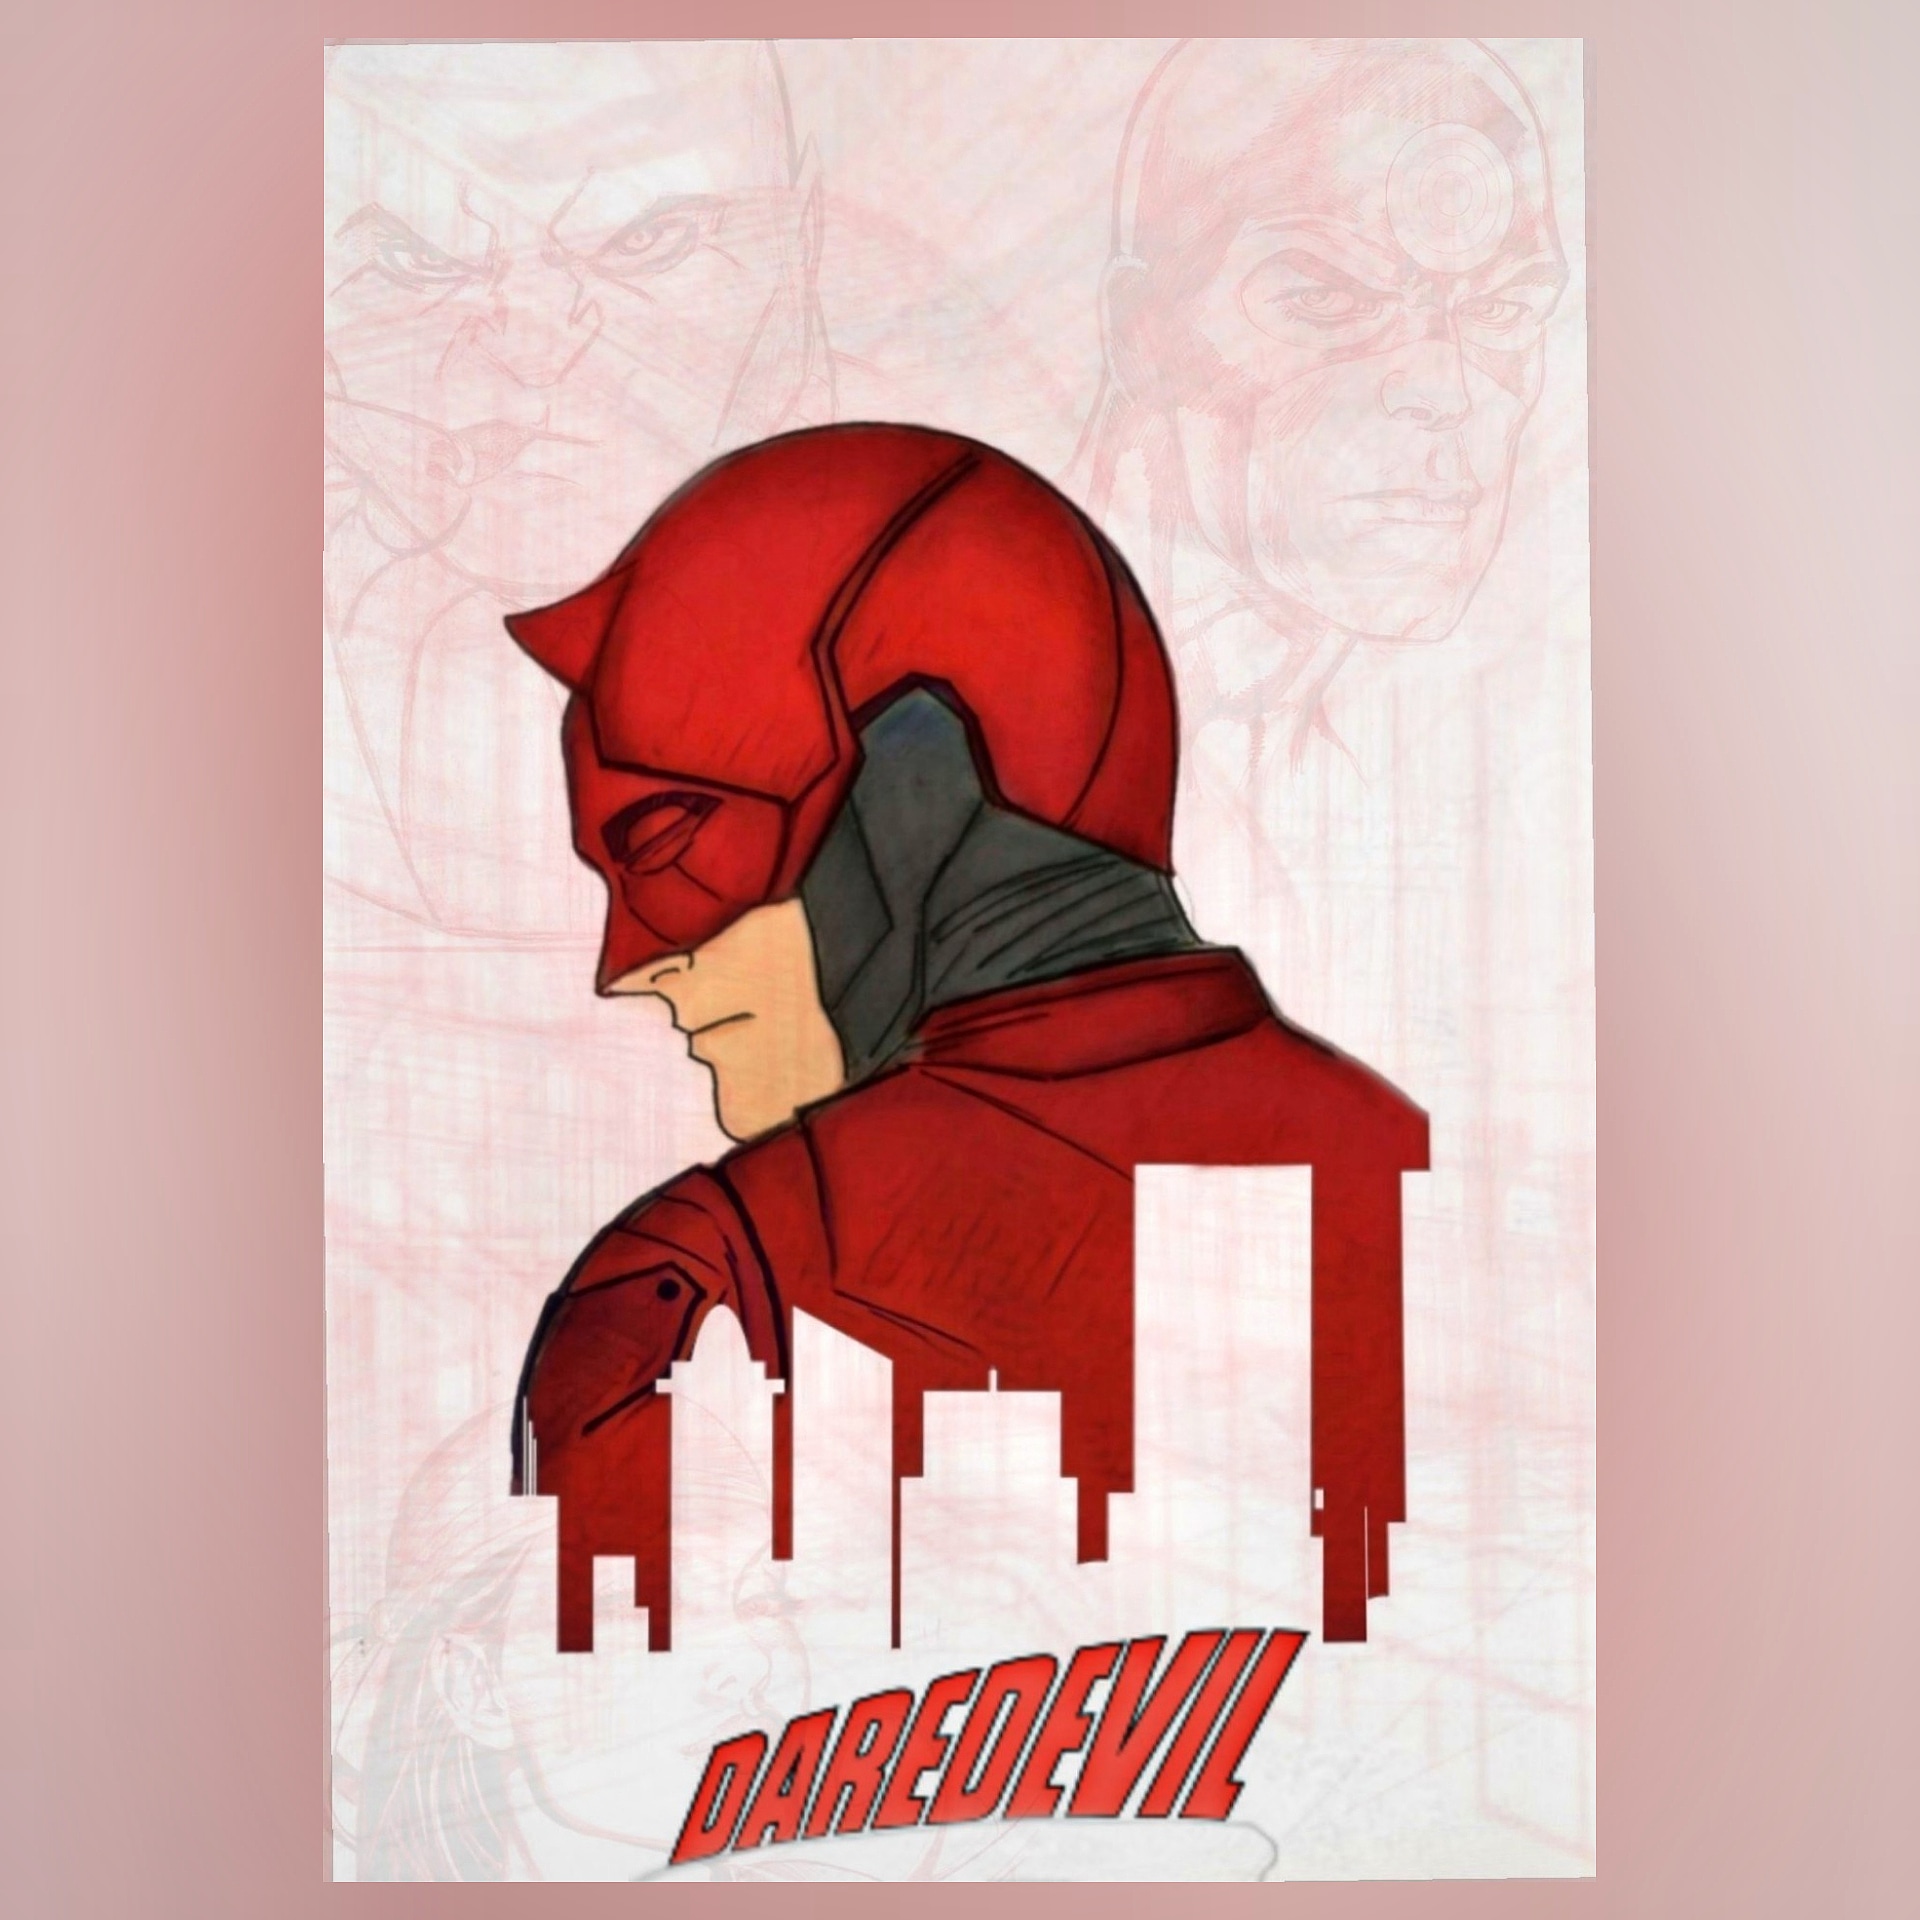 After a long time I drew Daredevil yesterday and yeah I used some references